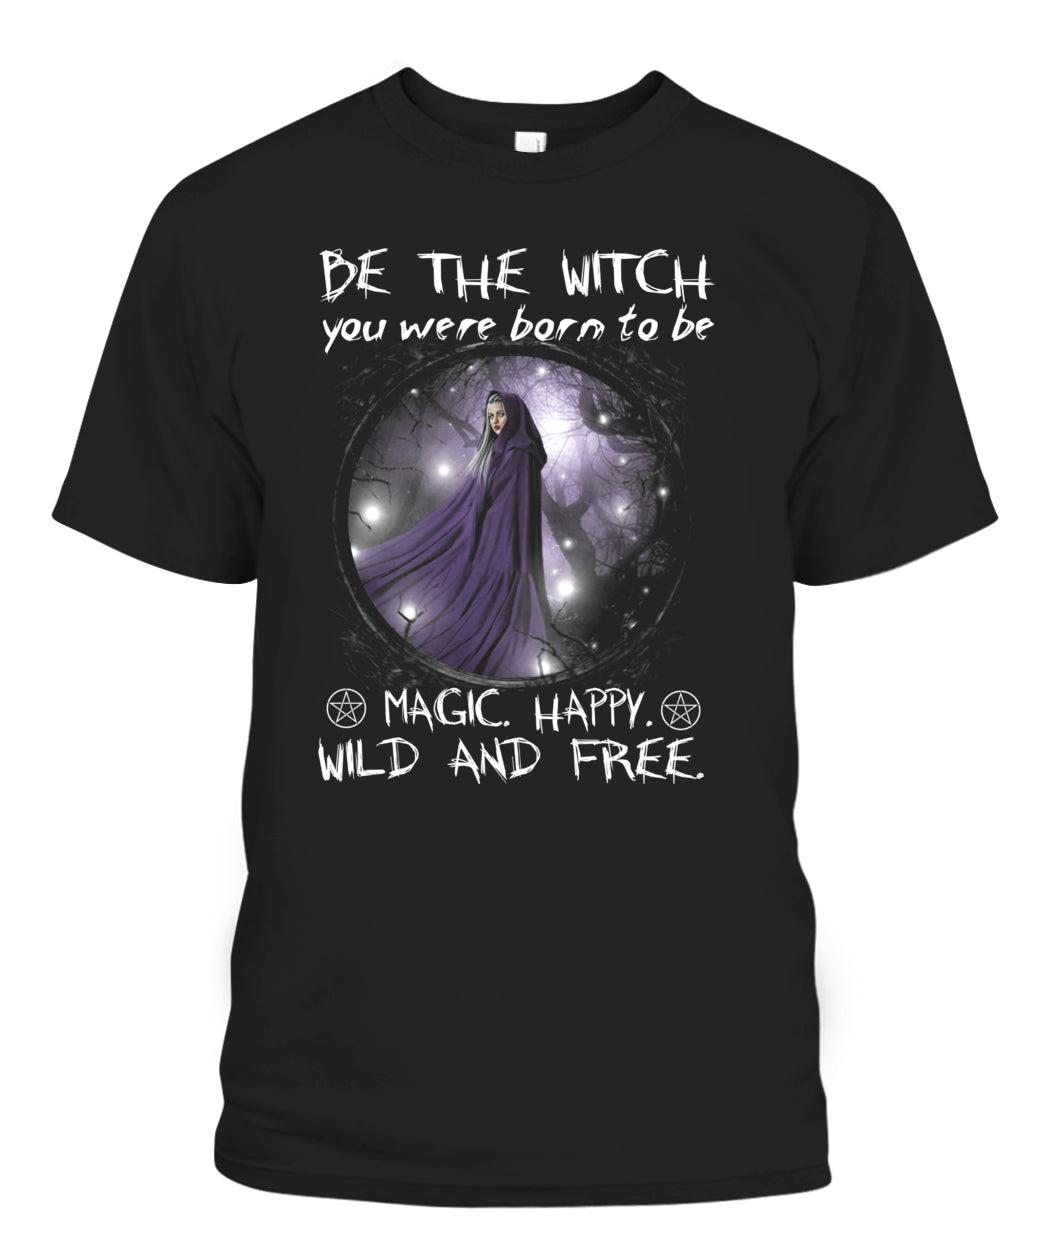 Witch Tshirt Be The Witch You Were Born To Be Shirt Magic Happy - Wild And Free-MoonChildWorld